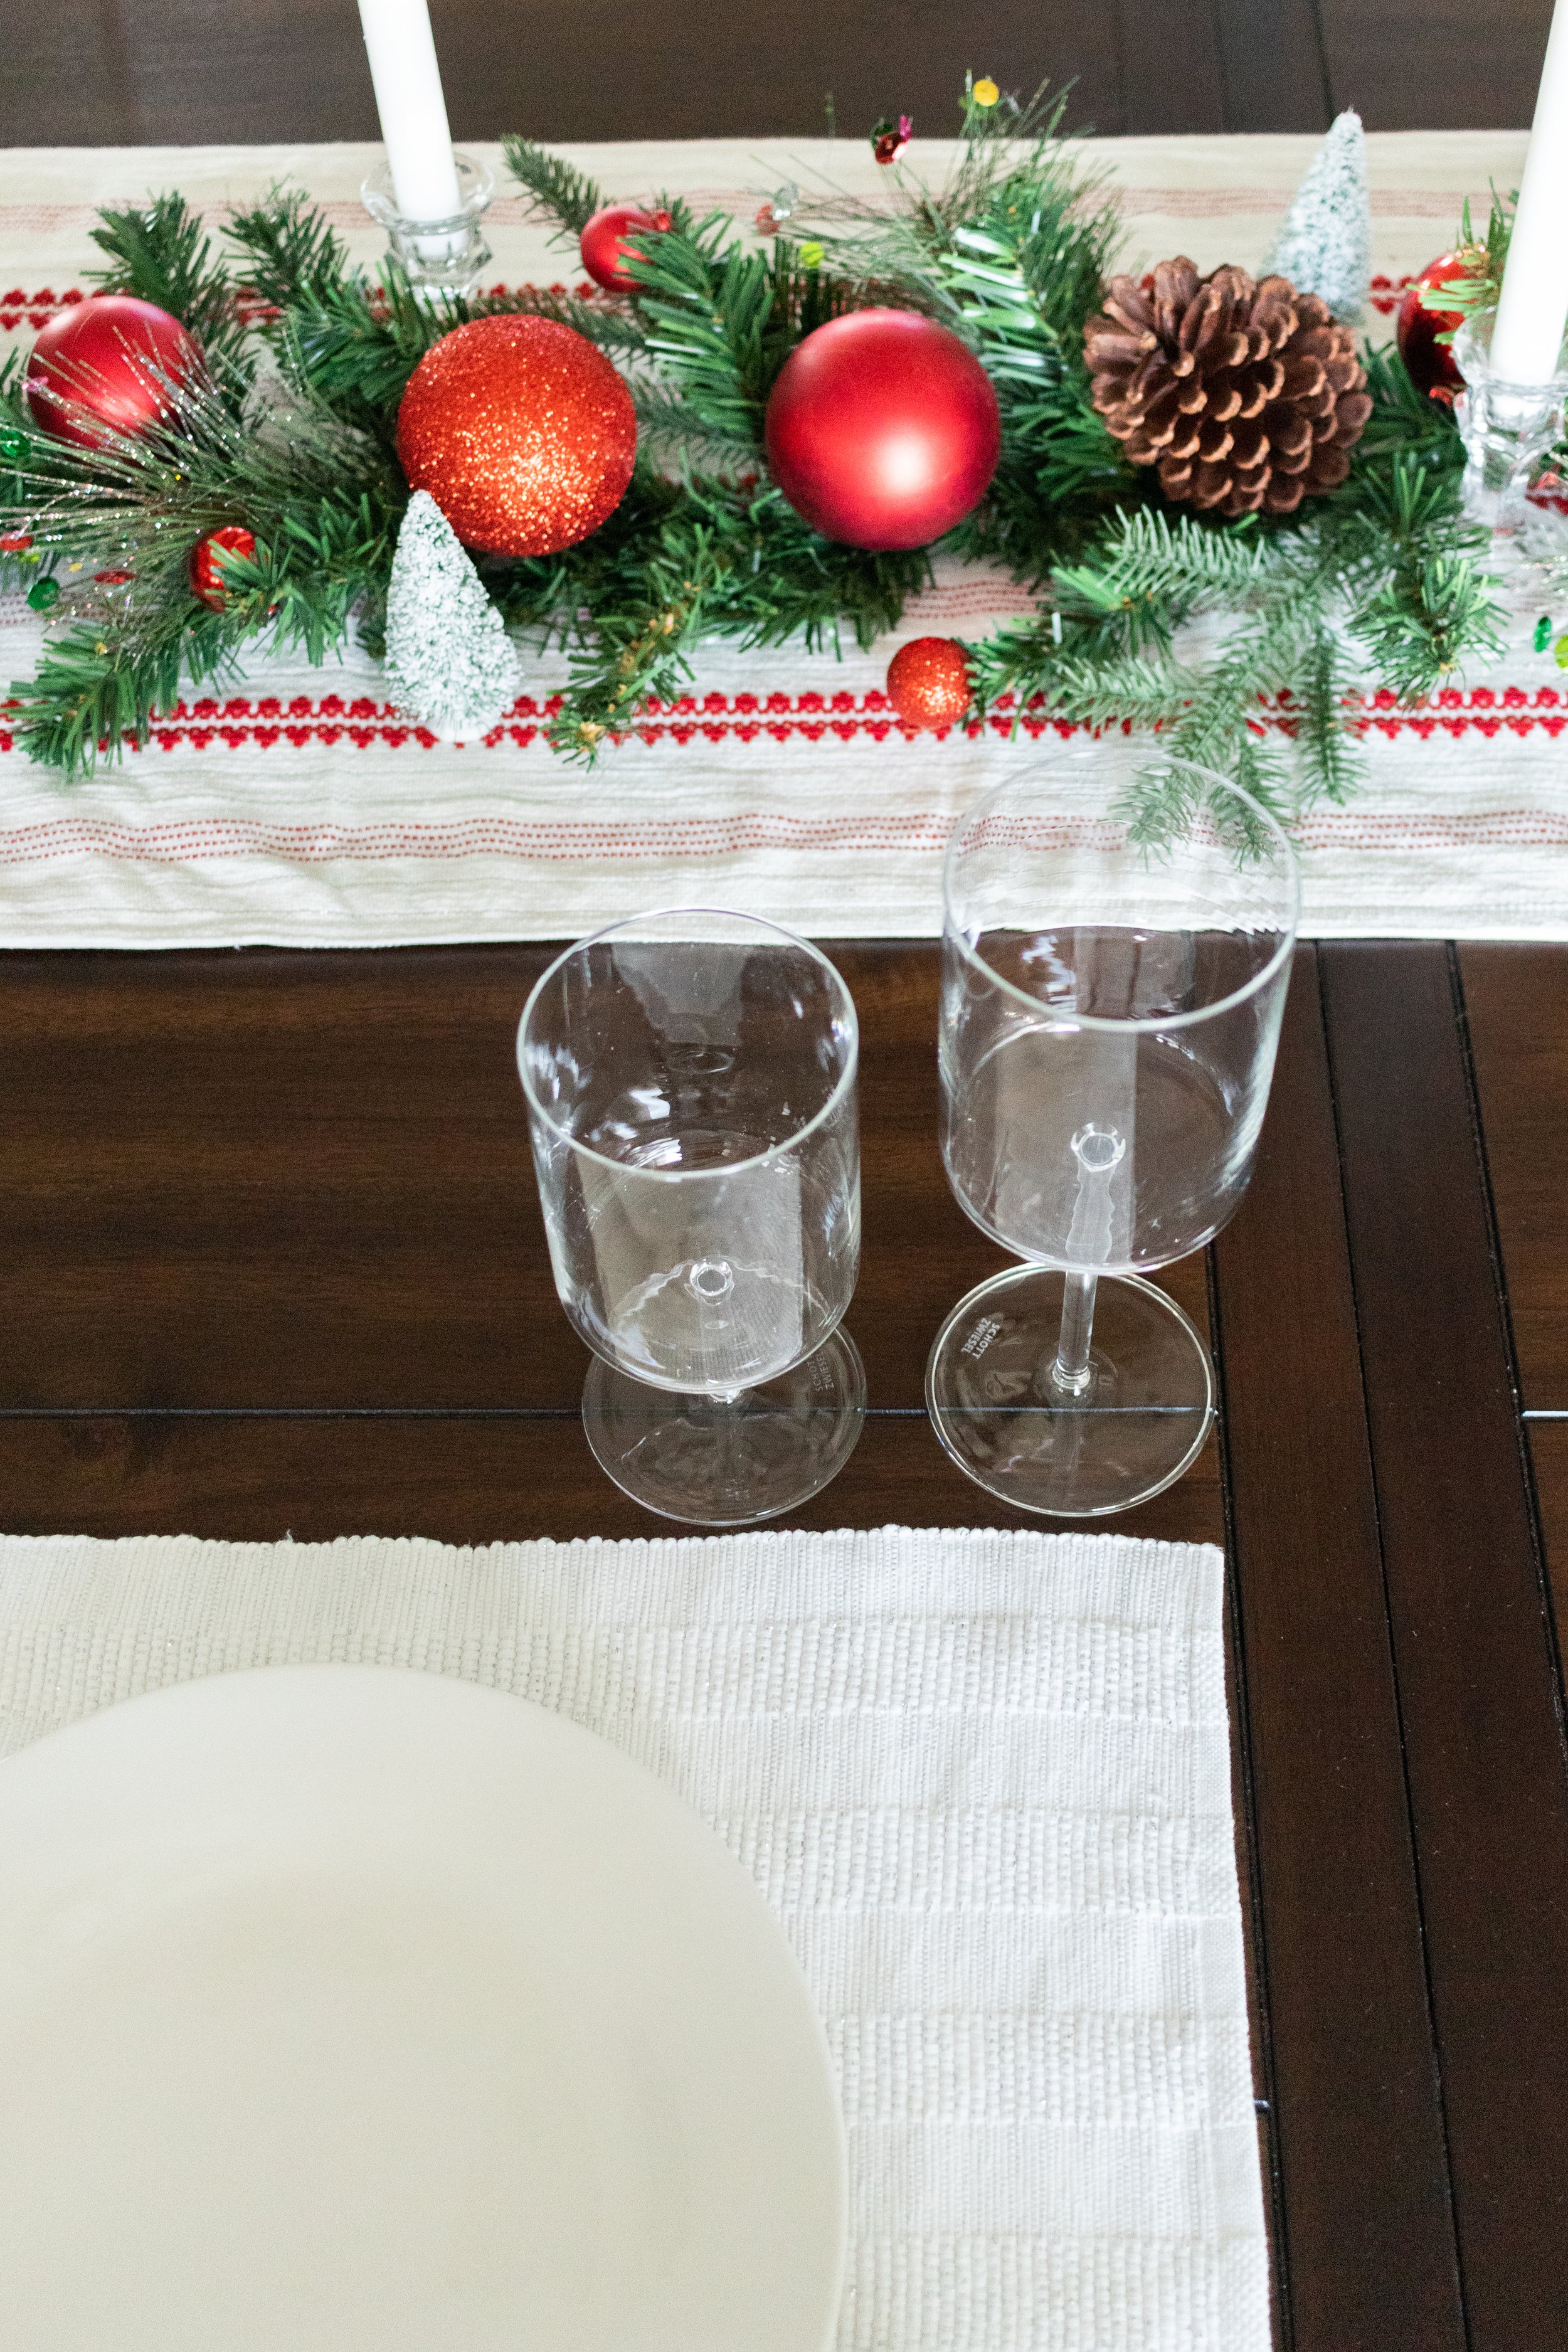 farmhouse wooden dining room table with white placemats for simple table decorations  and zwiesel wine glasses